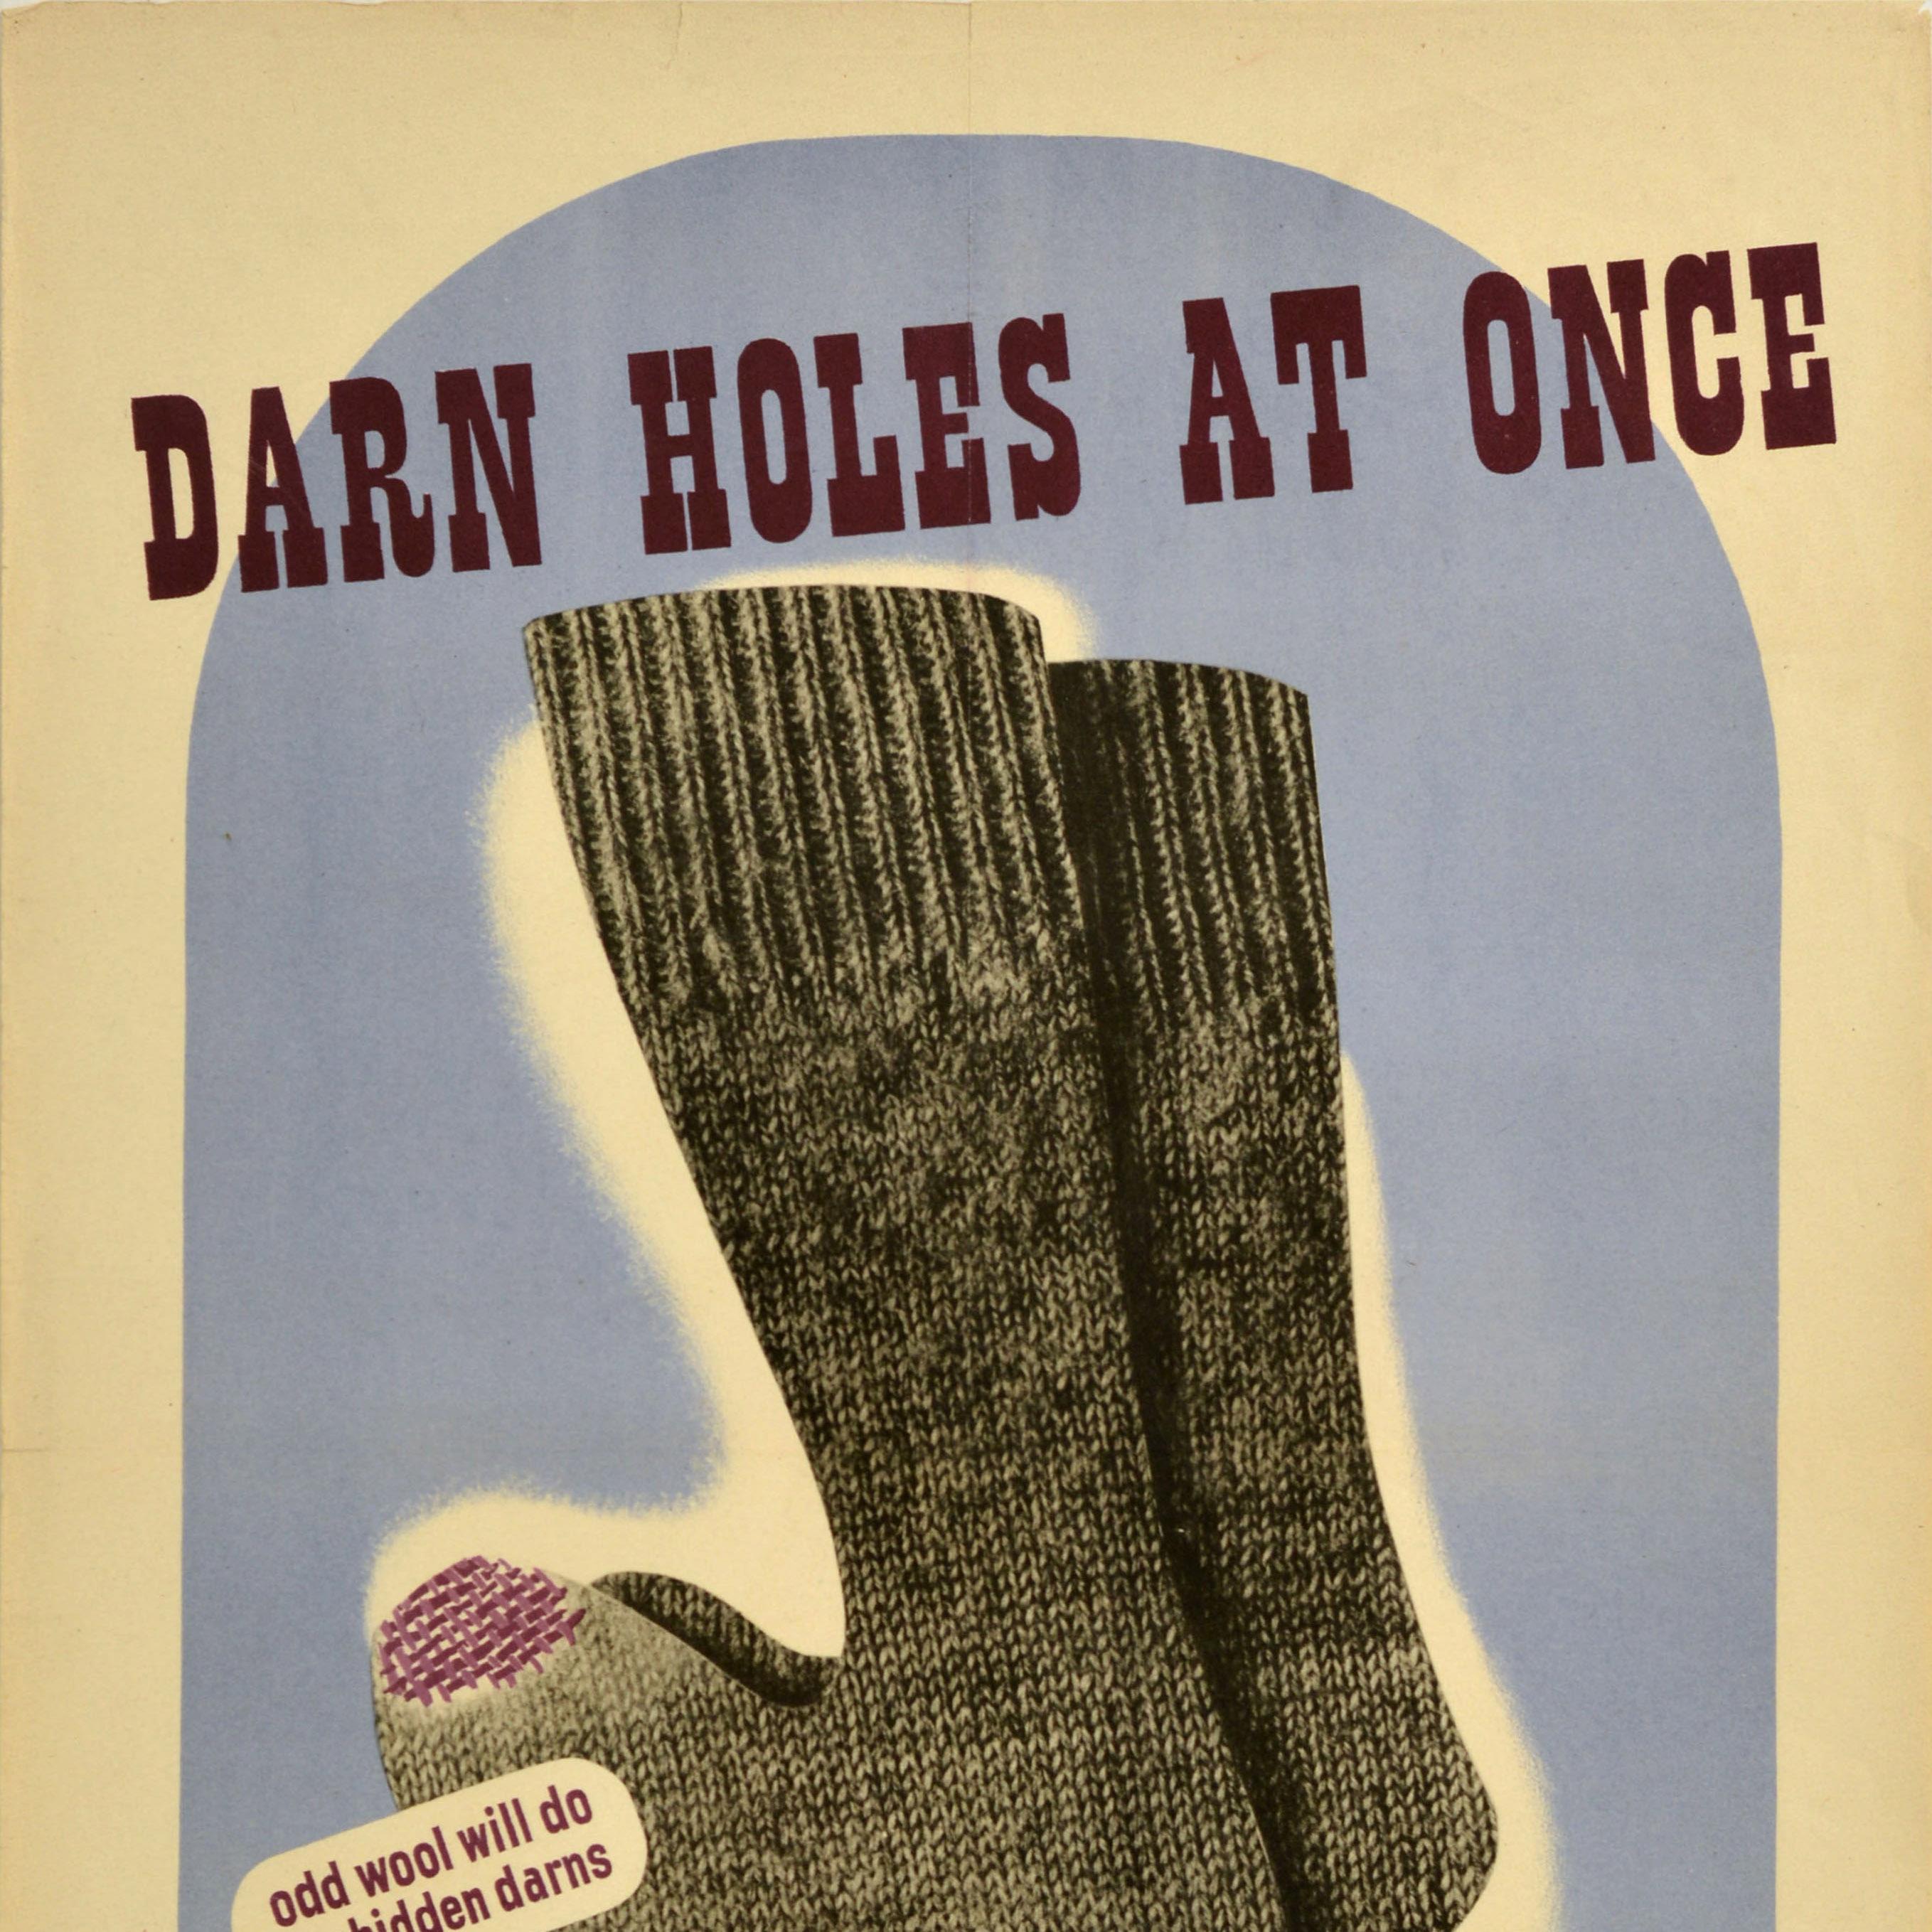 Original vintage World War Two propaganda poster - Darn holes at once Odd wool will do for hidden darns Little holes soon grow into big ones if left undarned a stitch in time saves coupons - featuring an illustration of a pair of grey wool socks